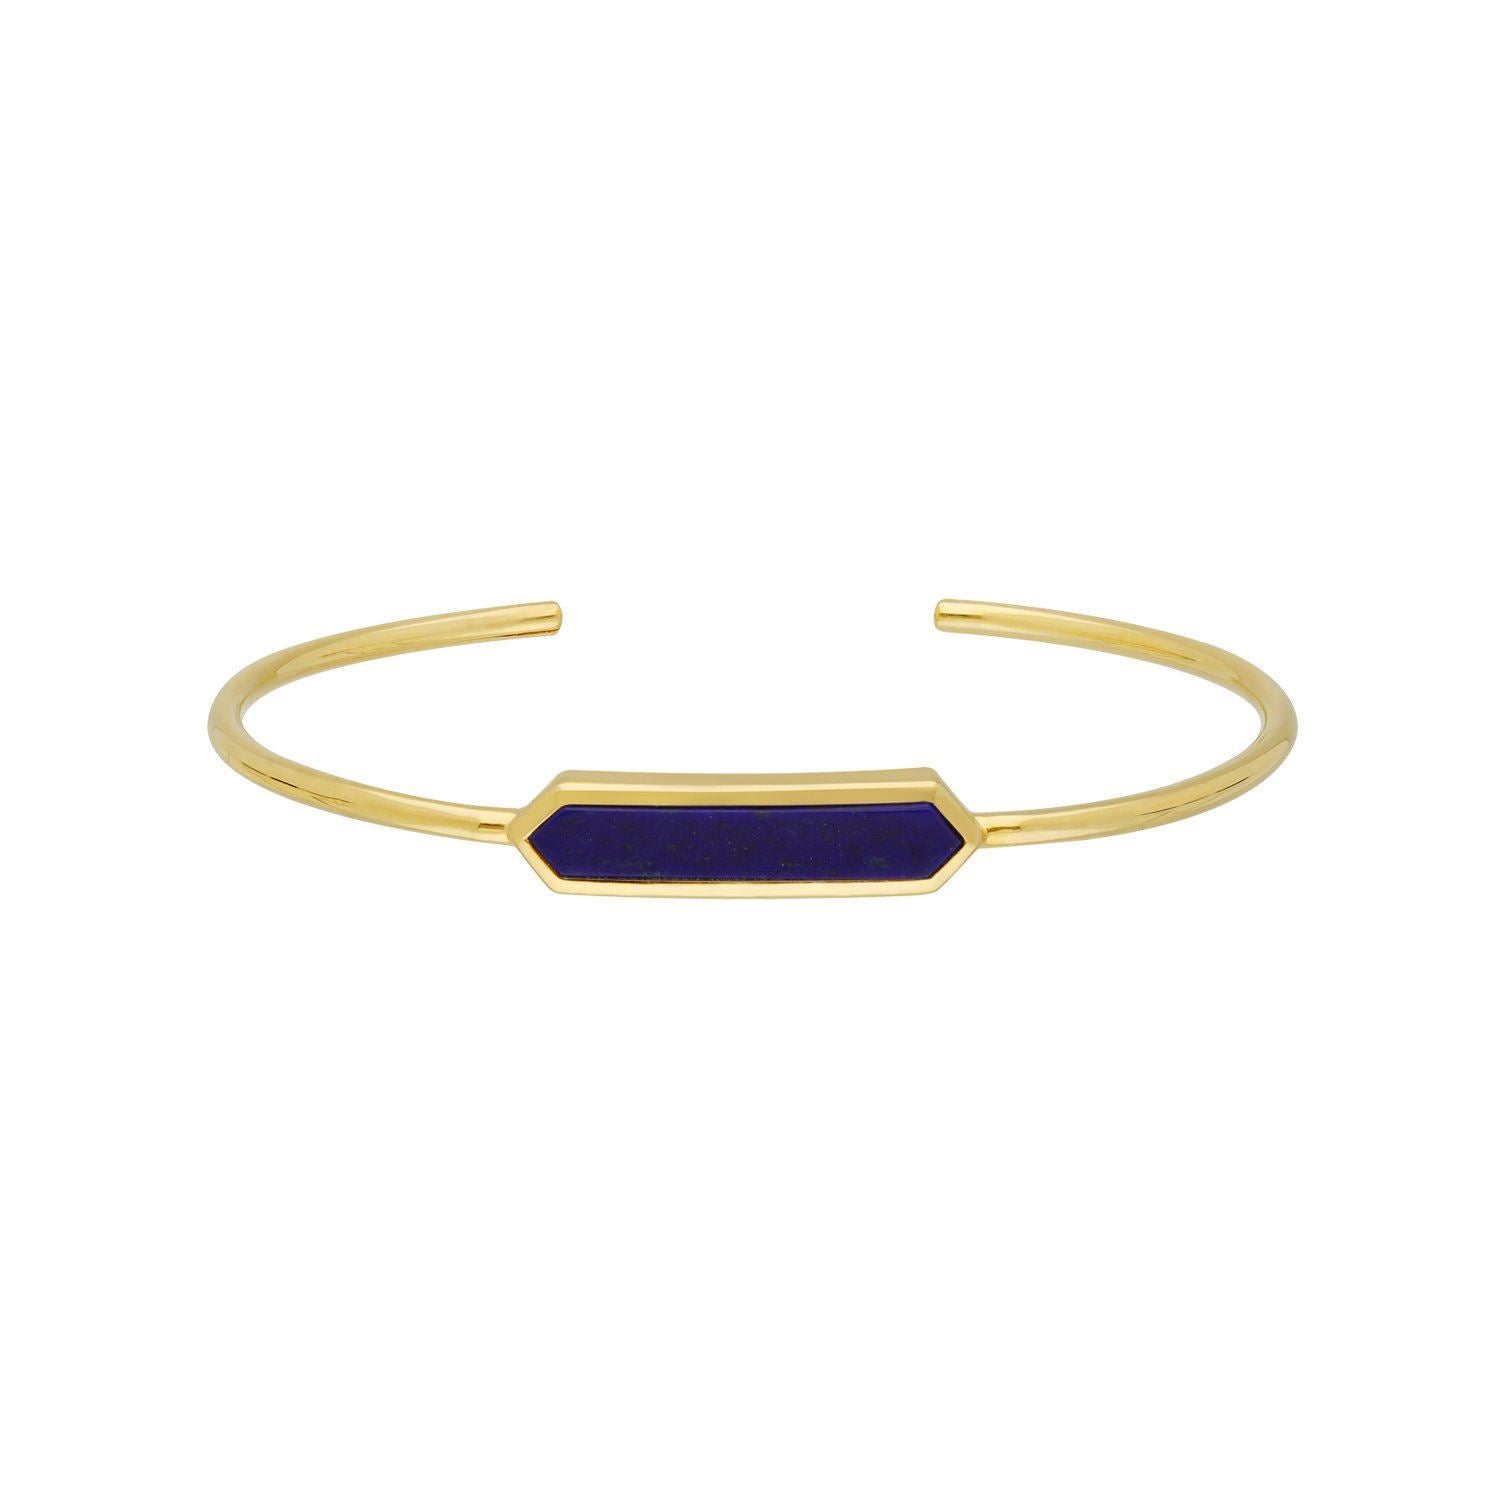 Geometric Prism Lapis Lazuli Bangle in Gold Plated Sterling Silver